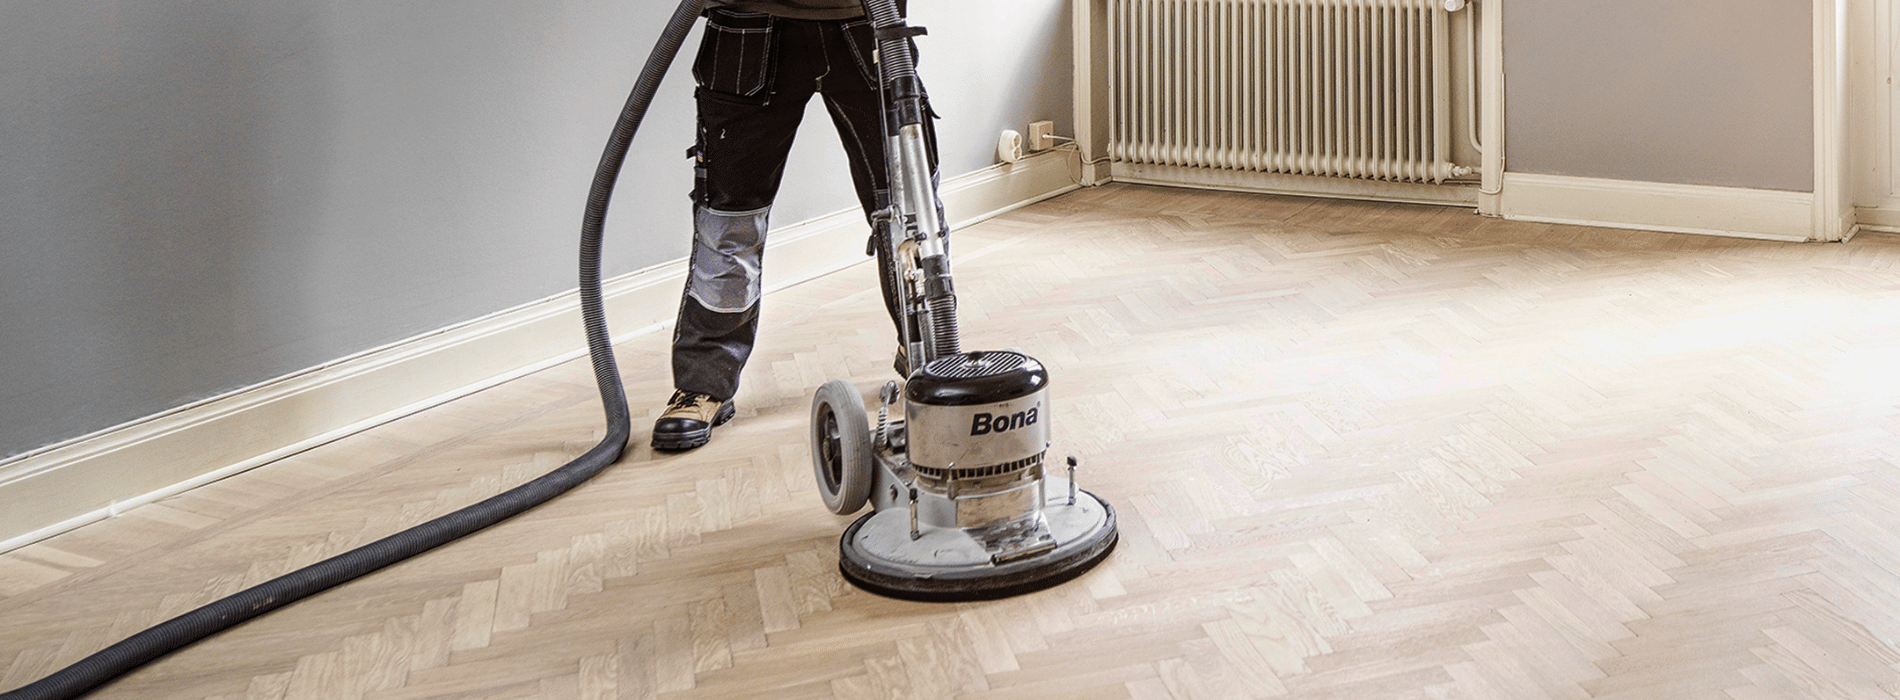 In Seven Kings, IG3, Mr Sander® use the powerful Bona FlexiSand 1.9 buffer sander, equipped with a Ø 407 mm dimension and an impressive 1.9 kW effect. With a voltage of 230 V and a frequency of 50 Hz/60 Hz, our dust extraction system with a HEPA filter ensures a clean and efficient result. 